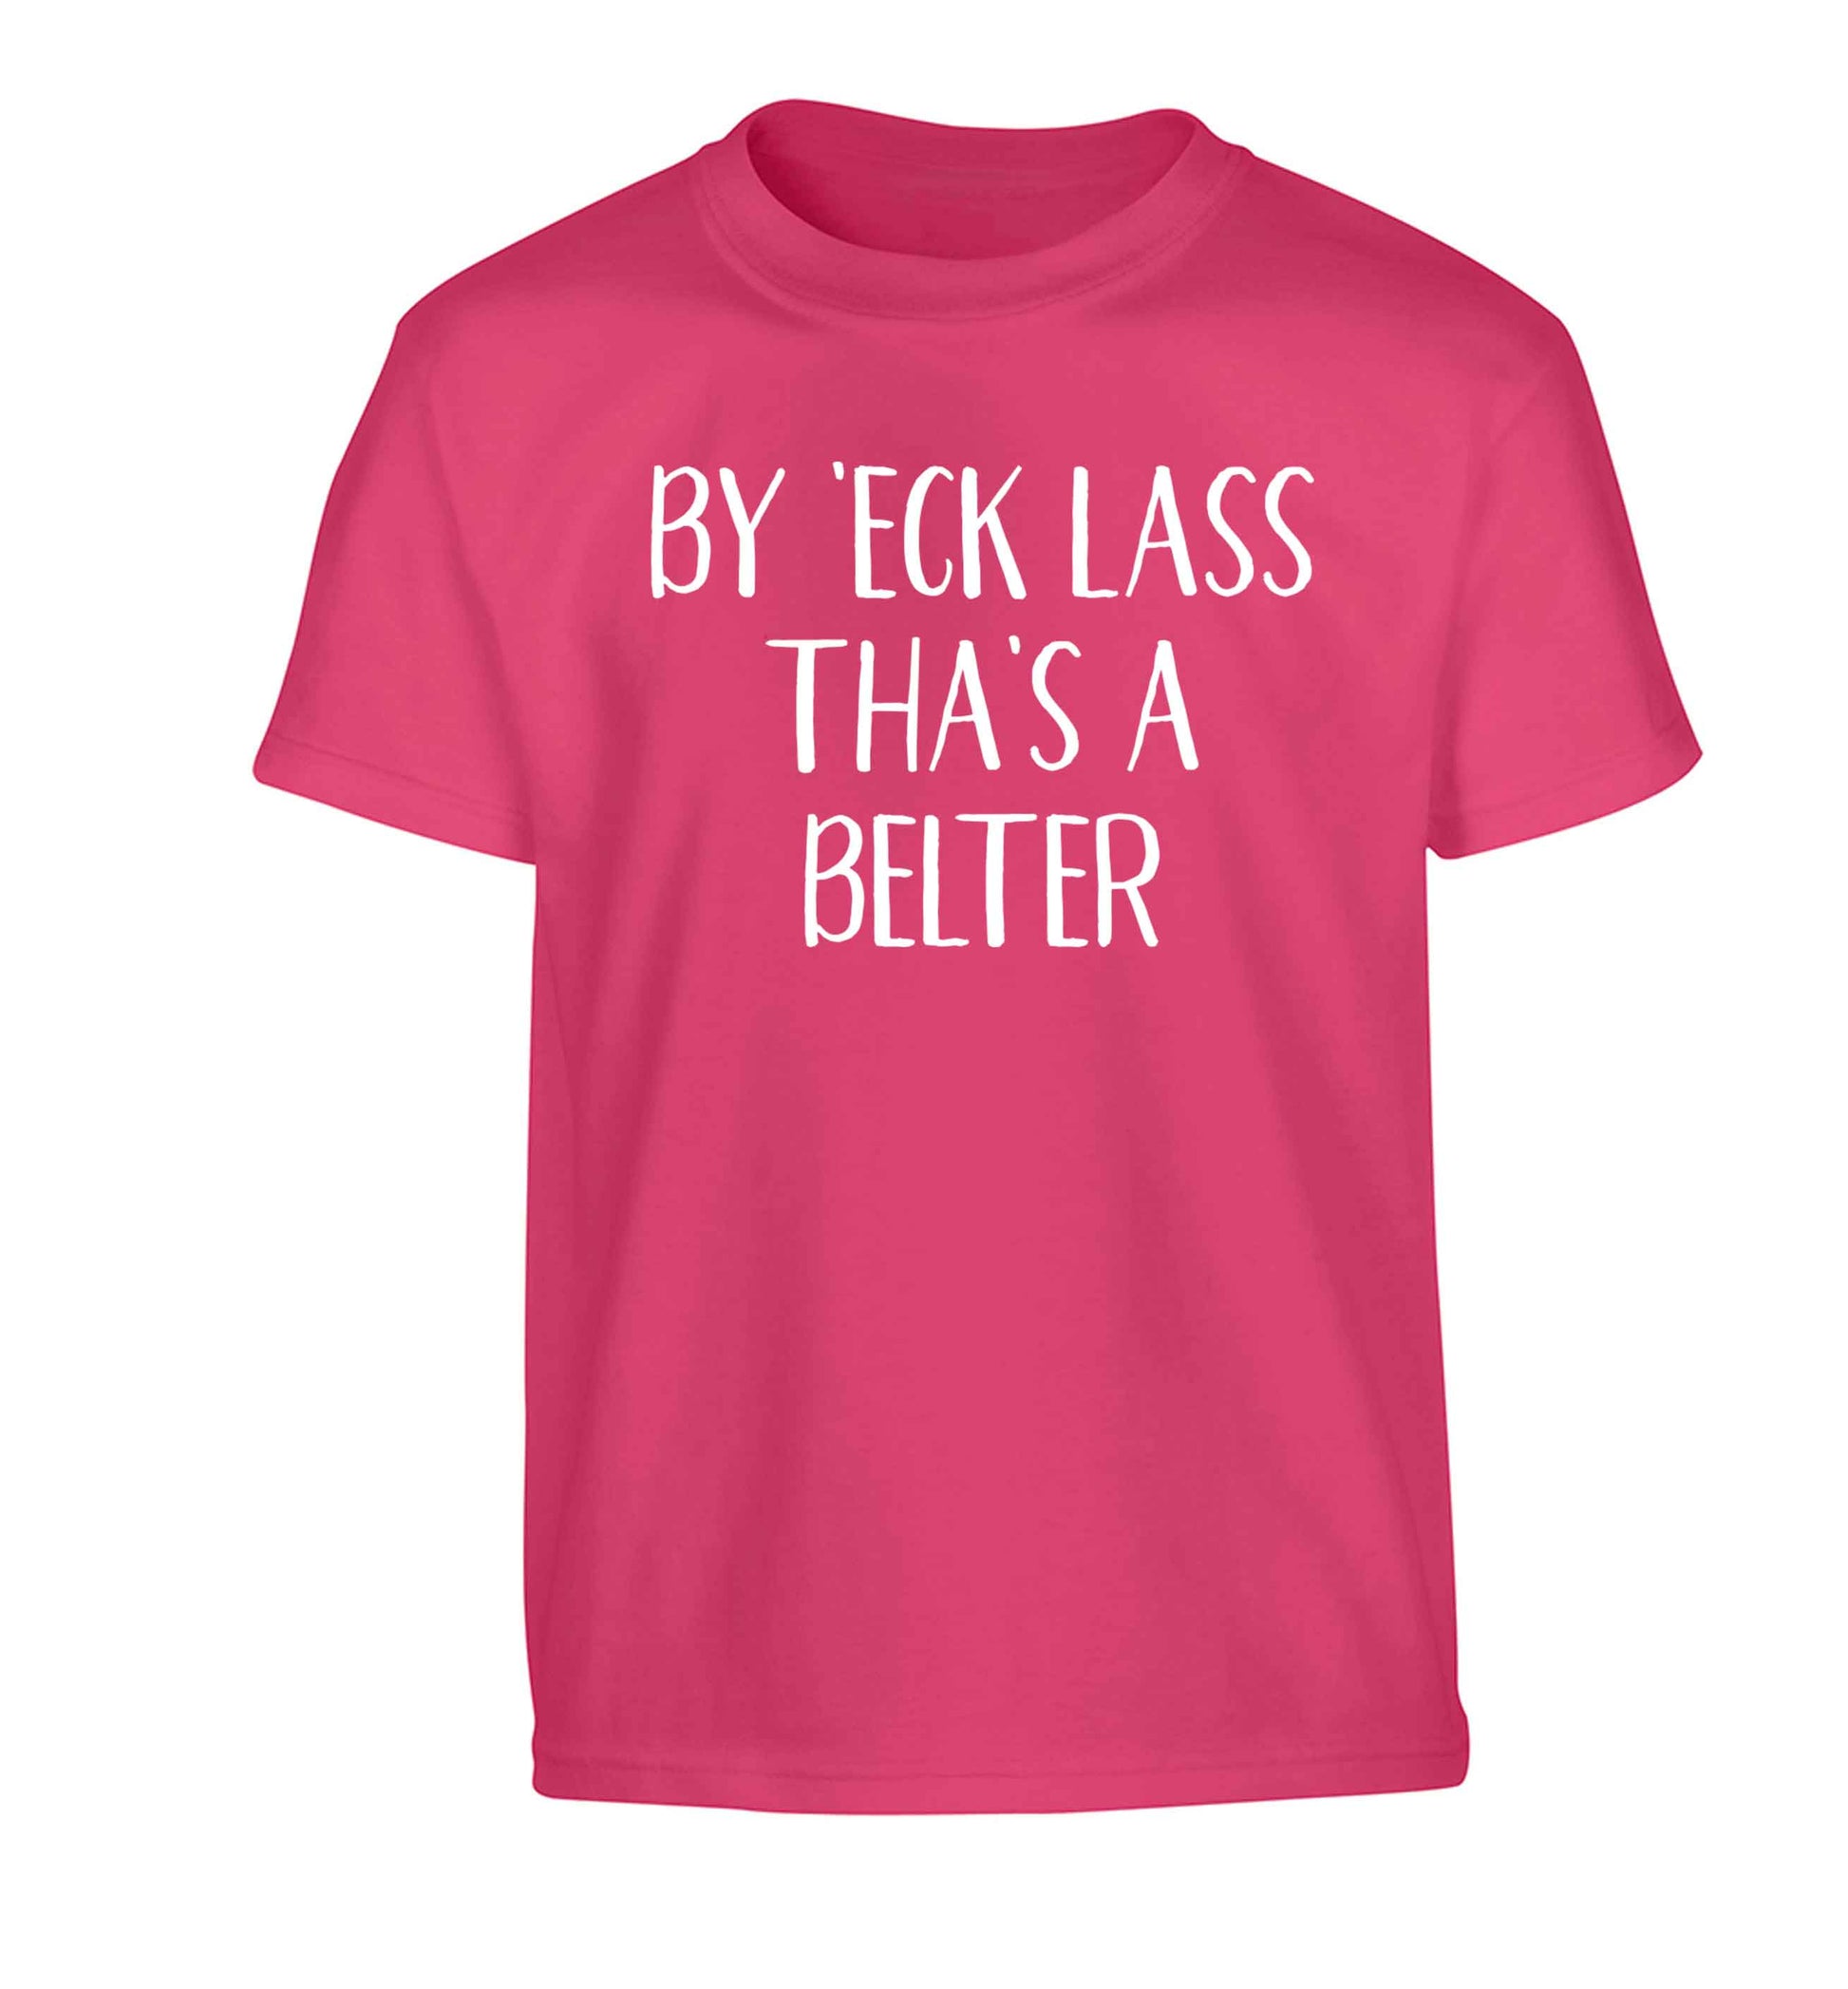 Be 'eck lass tha's a belter Children's pink Tshirt 12-13 Years